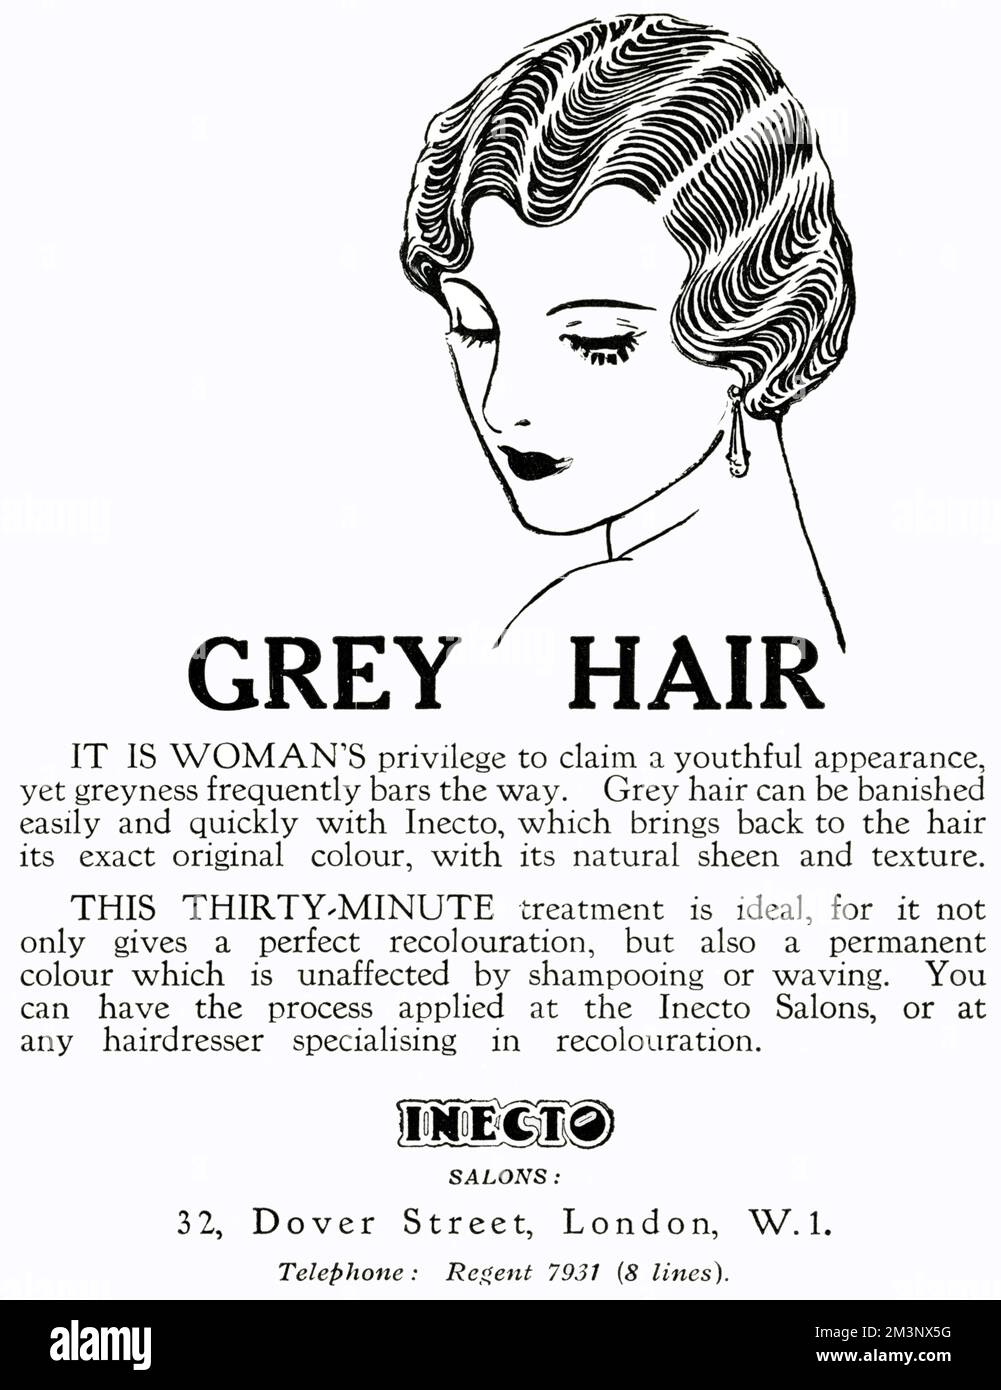 'Grey hair'.  It is women's privilage to claim a youthful appearance yet greyness frequently bars the way.  Gey hair can be banished easily and quickly with Inecto, which brings back to the hair its exact original colour, with its natual sheen and texture.  This thirty-minute treatment is ideal, for it not only gives a perfect recoloration, but also a permanent colour which is unaffected by shampooing or waving.  You can have the process applied at the Inecto Salons, or at any hairdresser specialising in recolouration.     Date: 1930 Stock Photo